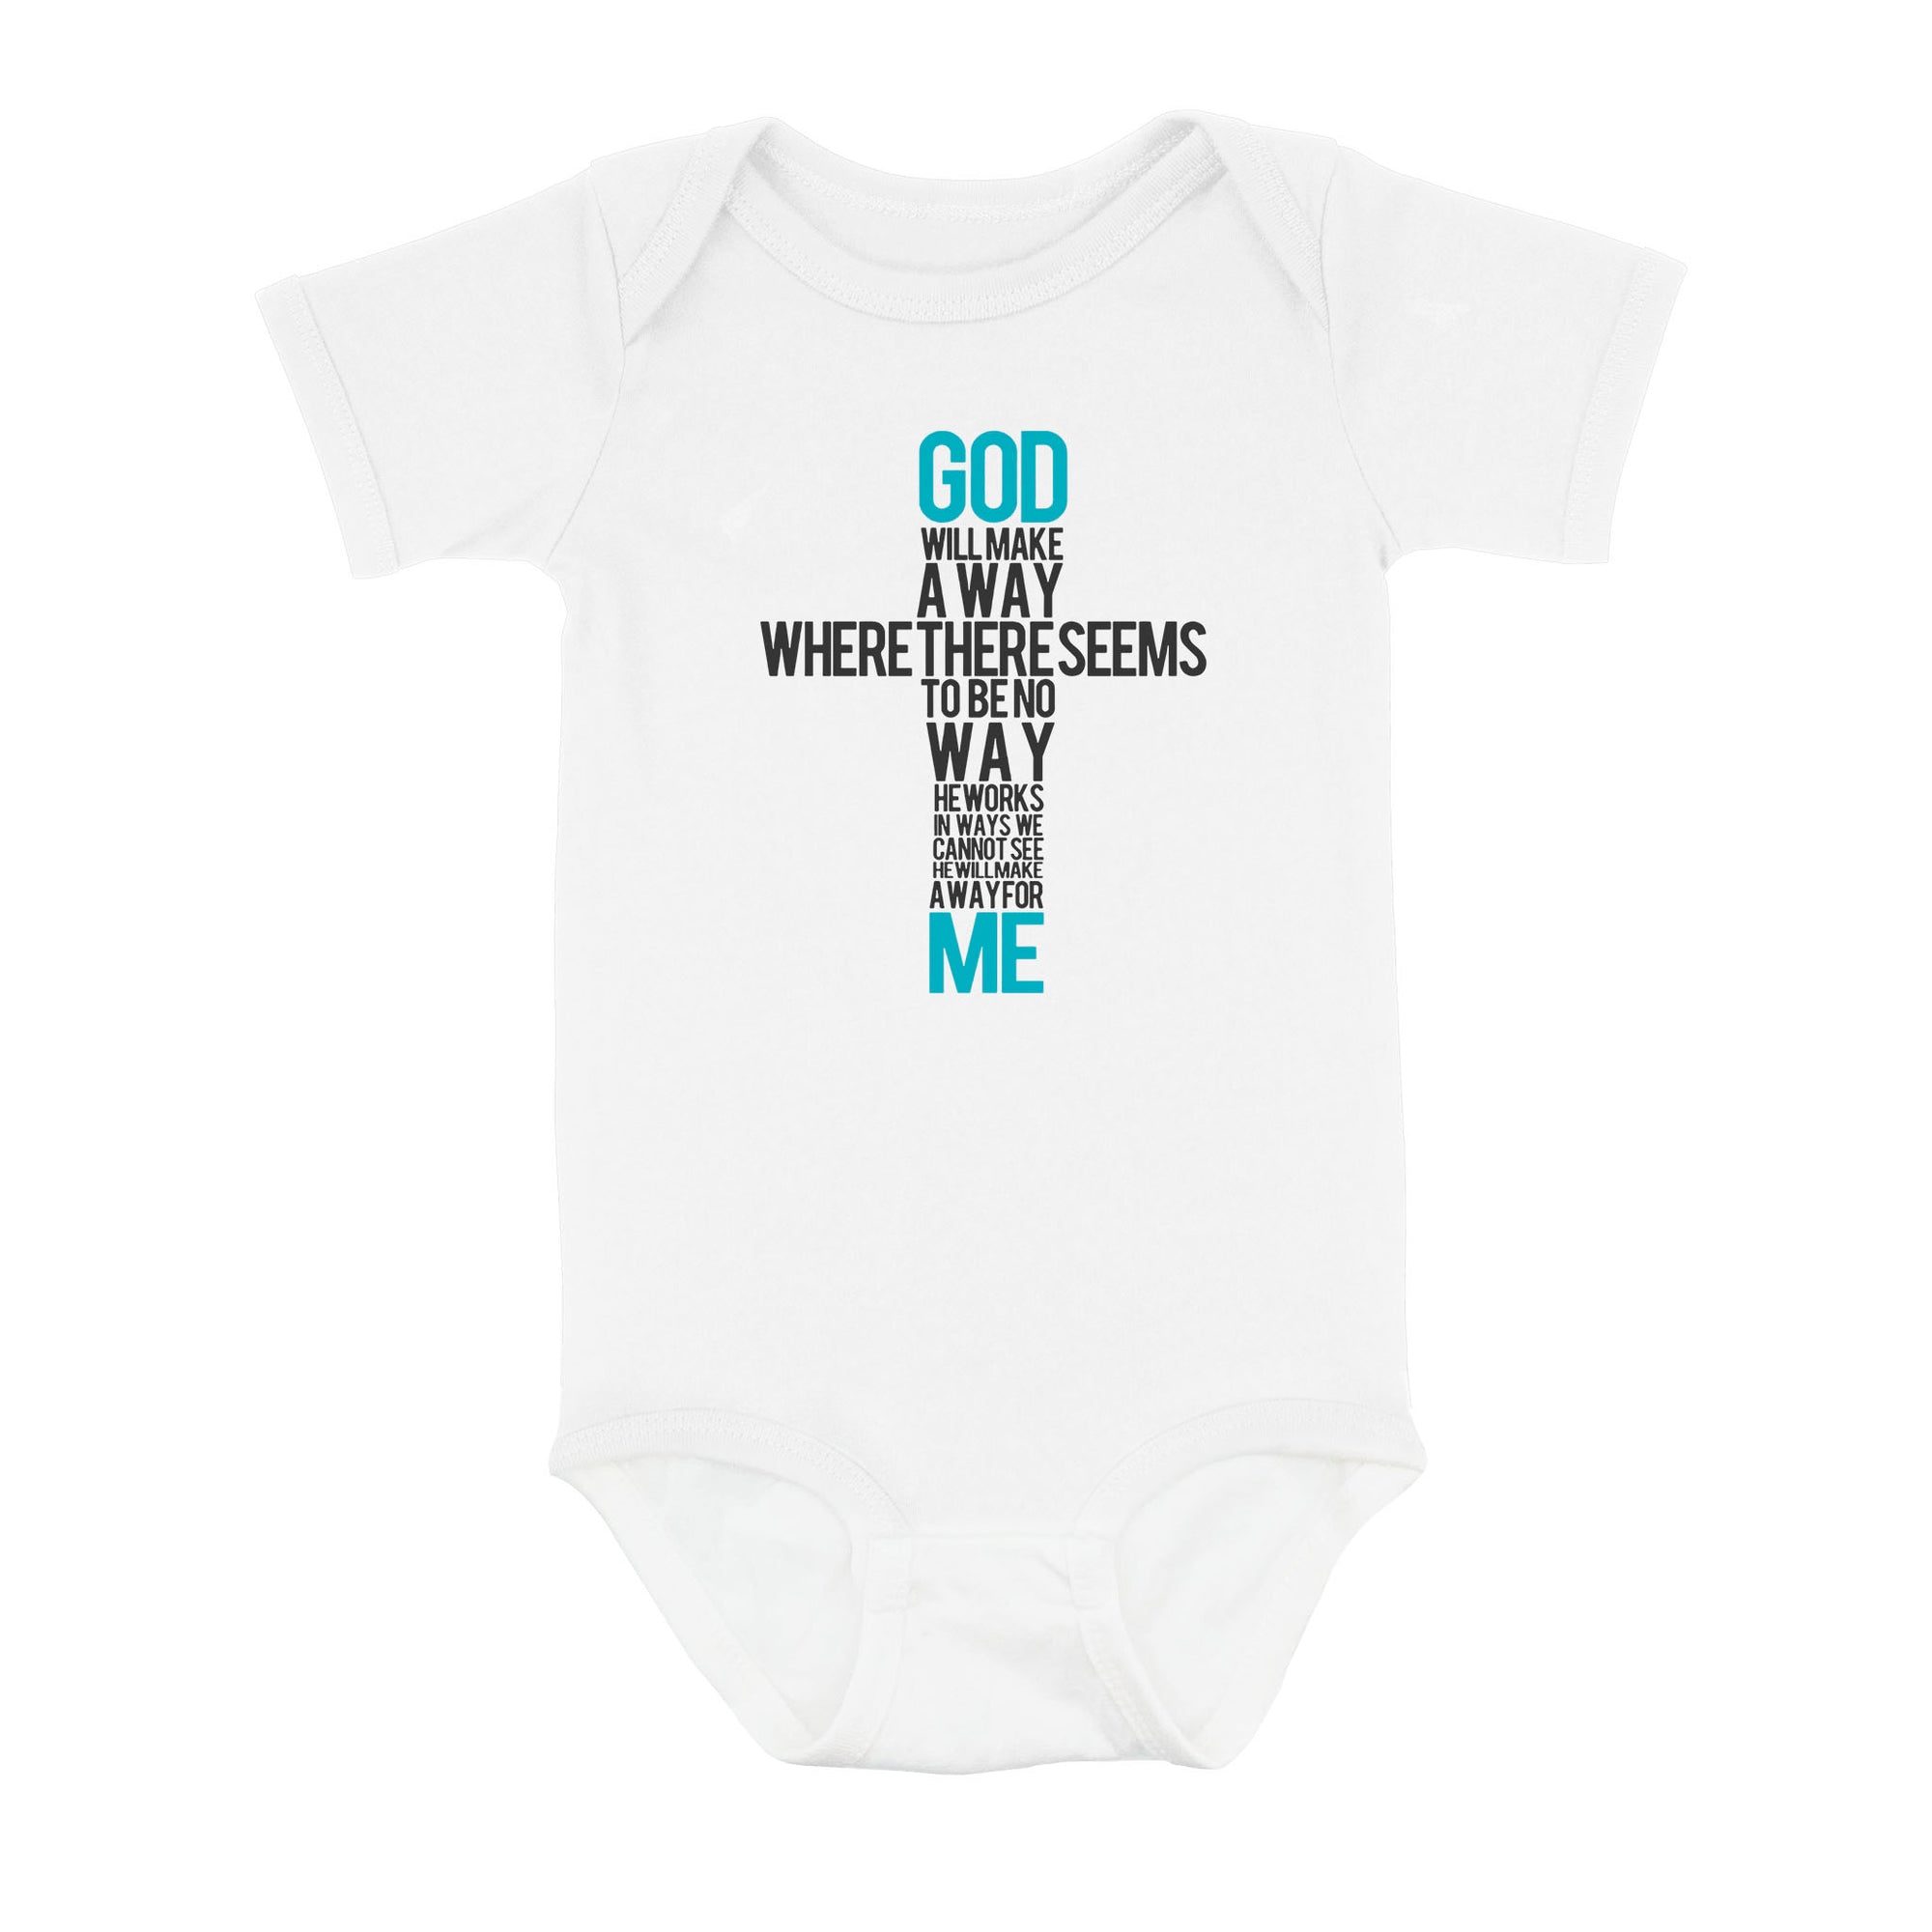 God Will Make A Way When It Seems There Is No Way - Baby Onesie